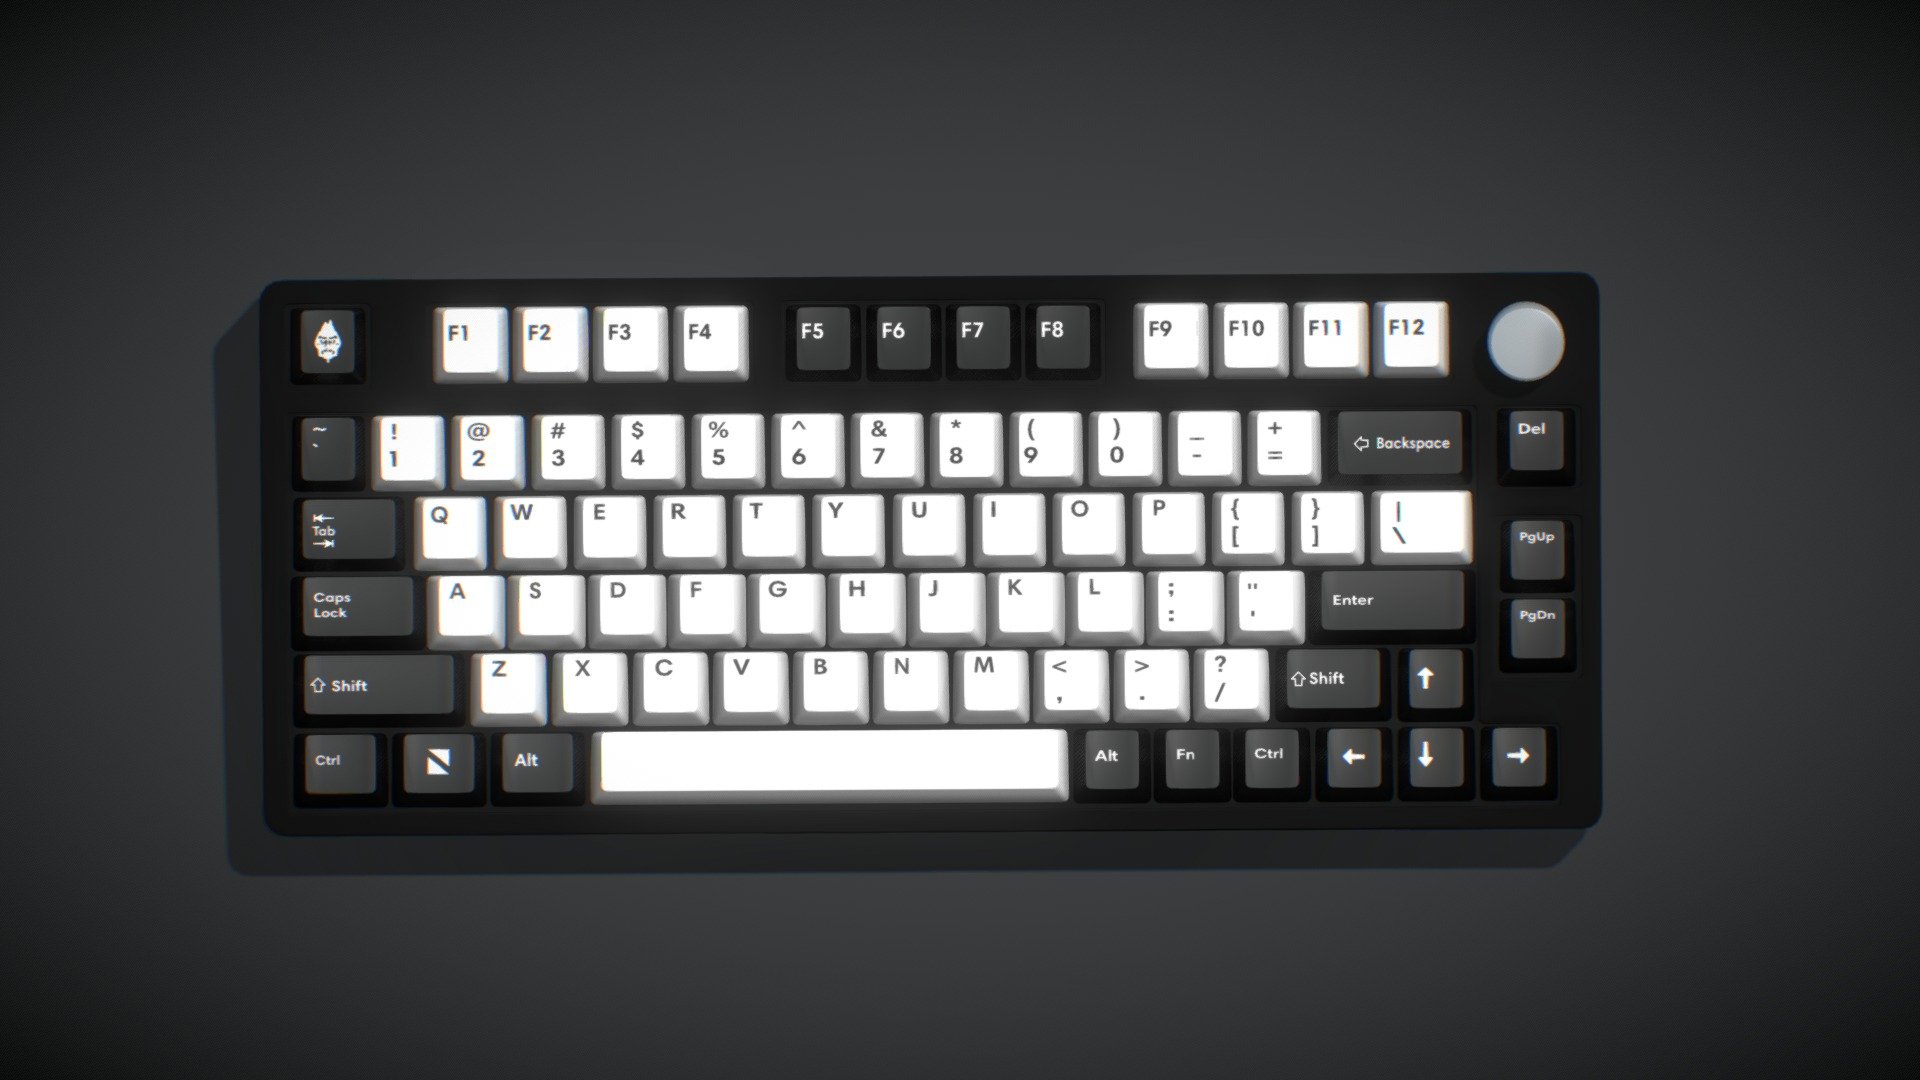 Based on my current mechanical keyboard.

Experience the pinnacle of precision and style with the VortexSeries GT-8 Mechanical Keyboard. Featuring a durable polycarbonate case, responsive KTT Mint switches, and sleek PBT double-shot black and white keycaps, this compact masterpiece delivers unmatched performance. With customizable RGB lighting and an ergonomic design, the GT-8 is the ultimate keyboard for gamers and professionals alike.

Hey there! Want to stay in the loop and be the first to know about my latest uploads? Consider hitting that follow button - VortexSeries Mechanical Keyboard GT-8 / NJ80 - Download Free 3D model by Rendy K (@RendyK) 3d model